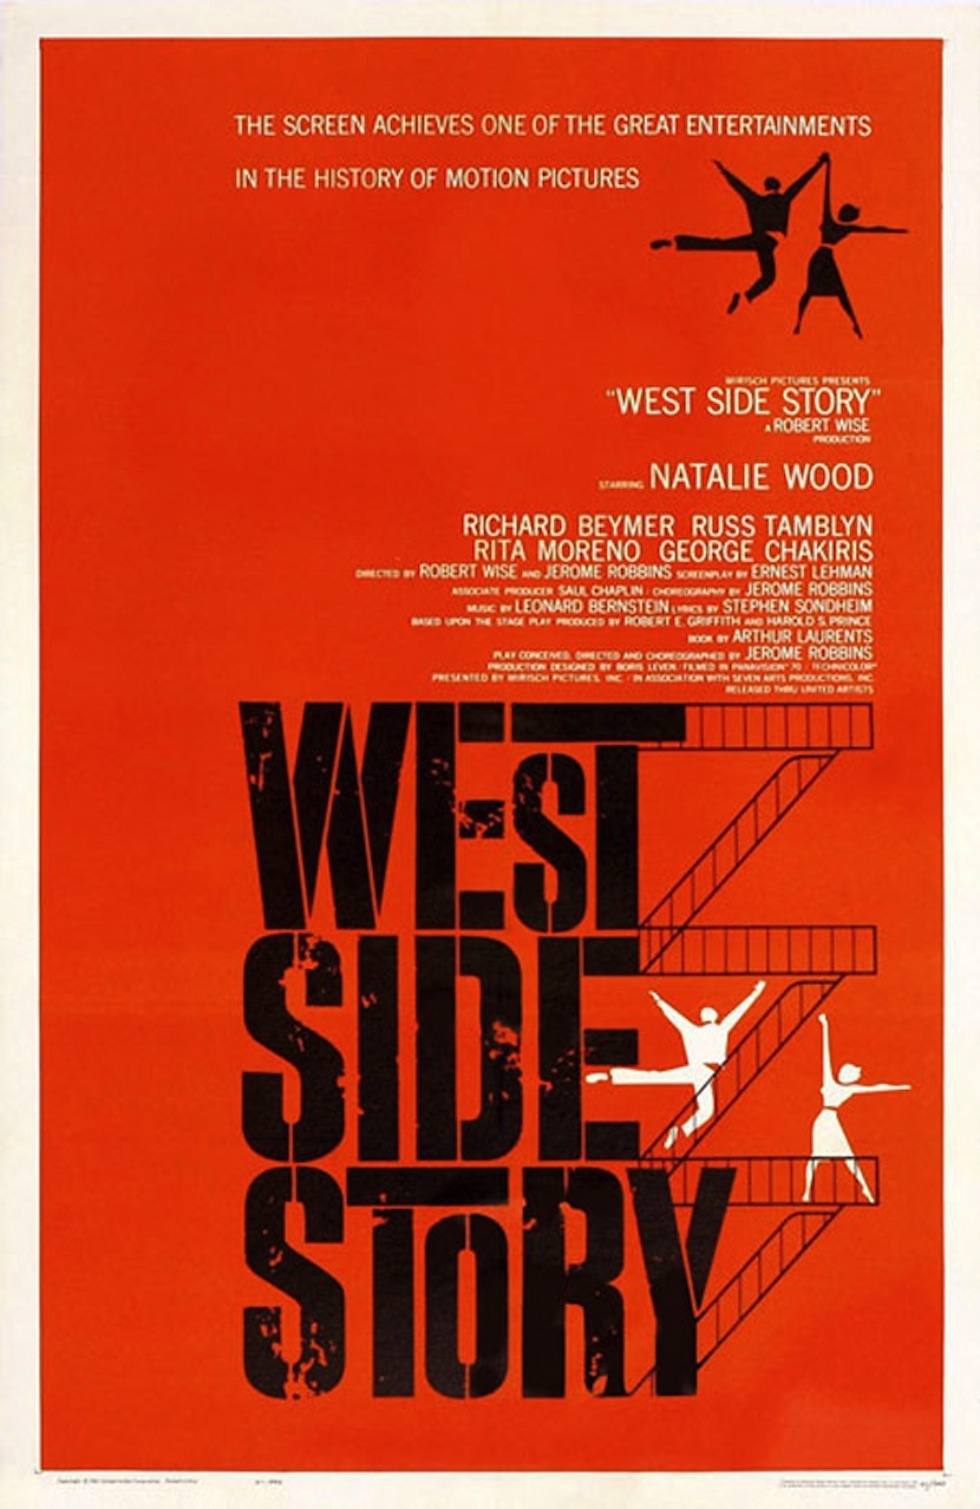 West Side Story – Jerome Robbins e Robert Wise, 1961